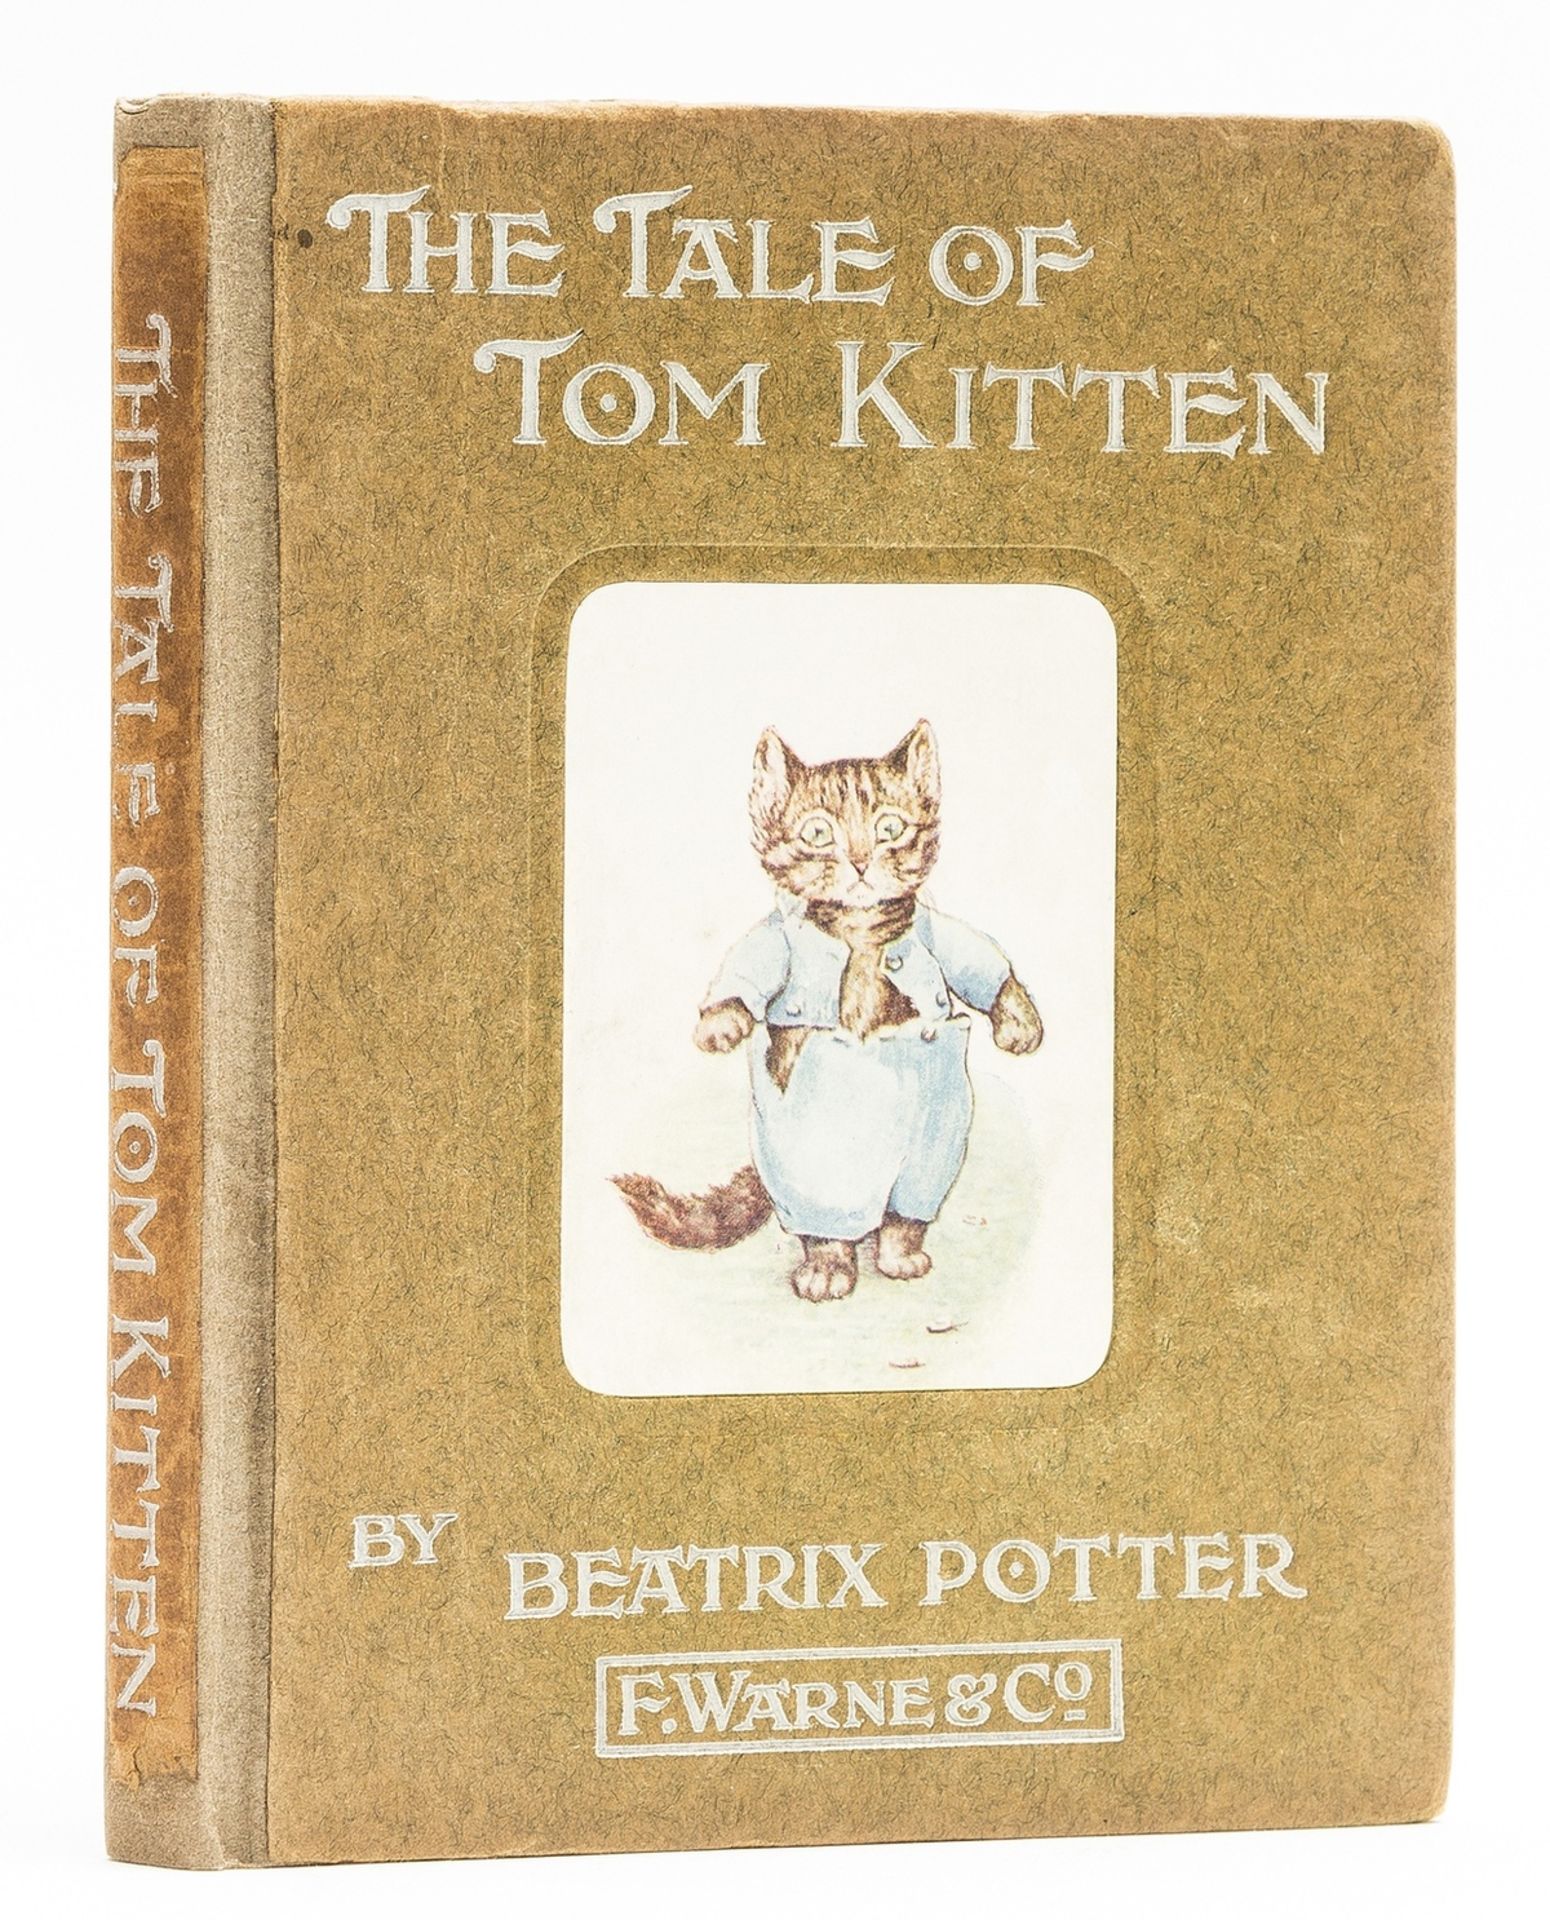 Potter (Beatrix) The Tale of Tom Kitten, first edition, 1907.